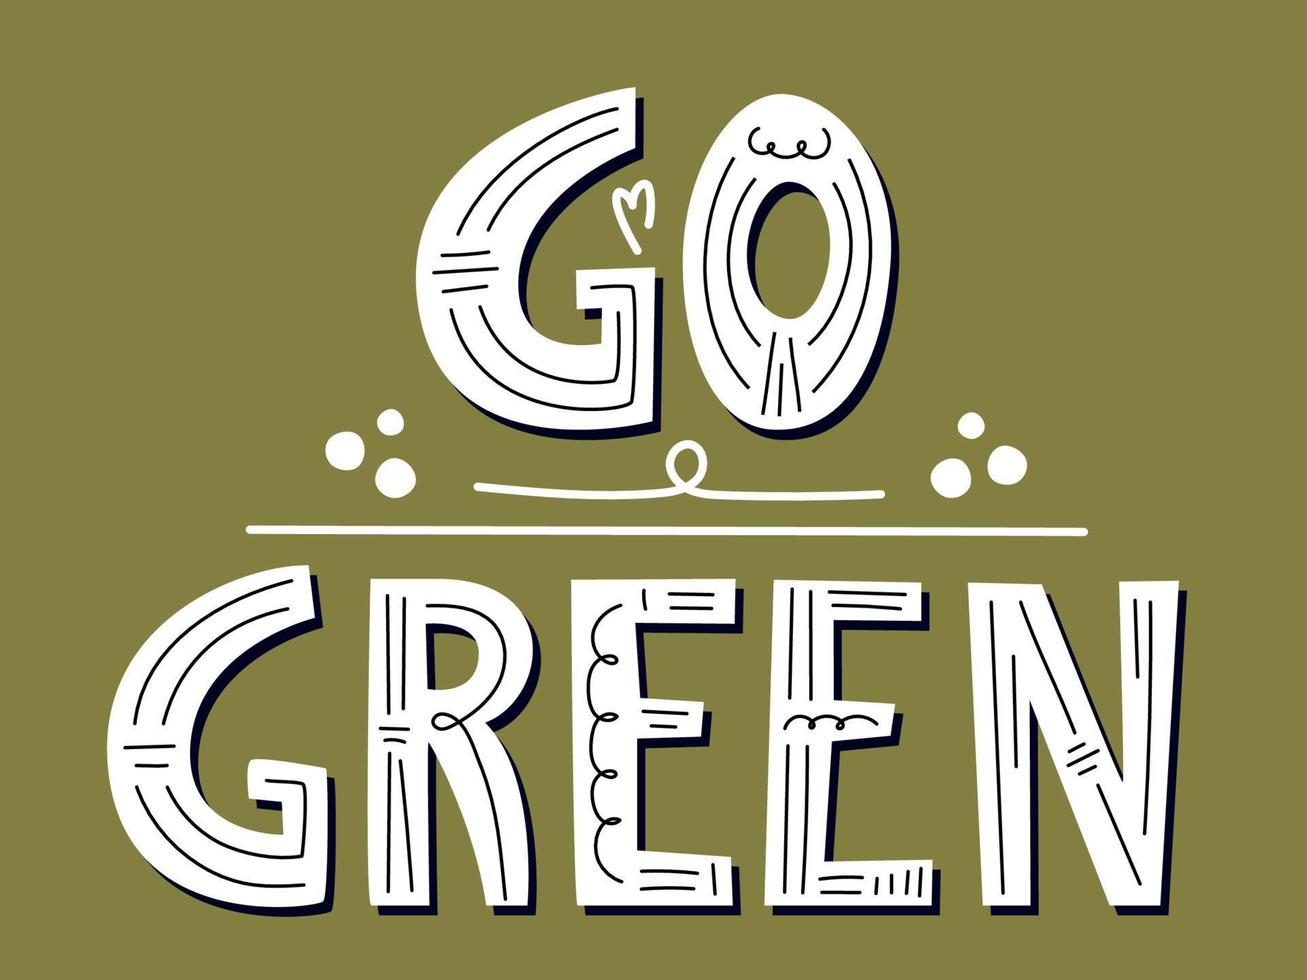 Go Green vector hand drawn sign. Lettering motivational quote for shopping bags, t-shirts, apparel or posters. Zero waste lifestyle motivation slogan. Environmental ecological phrase